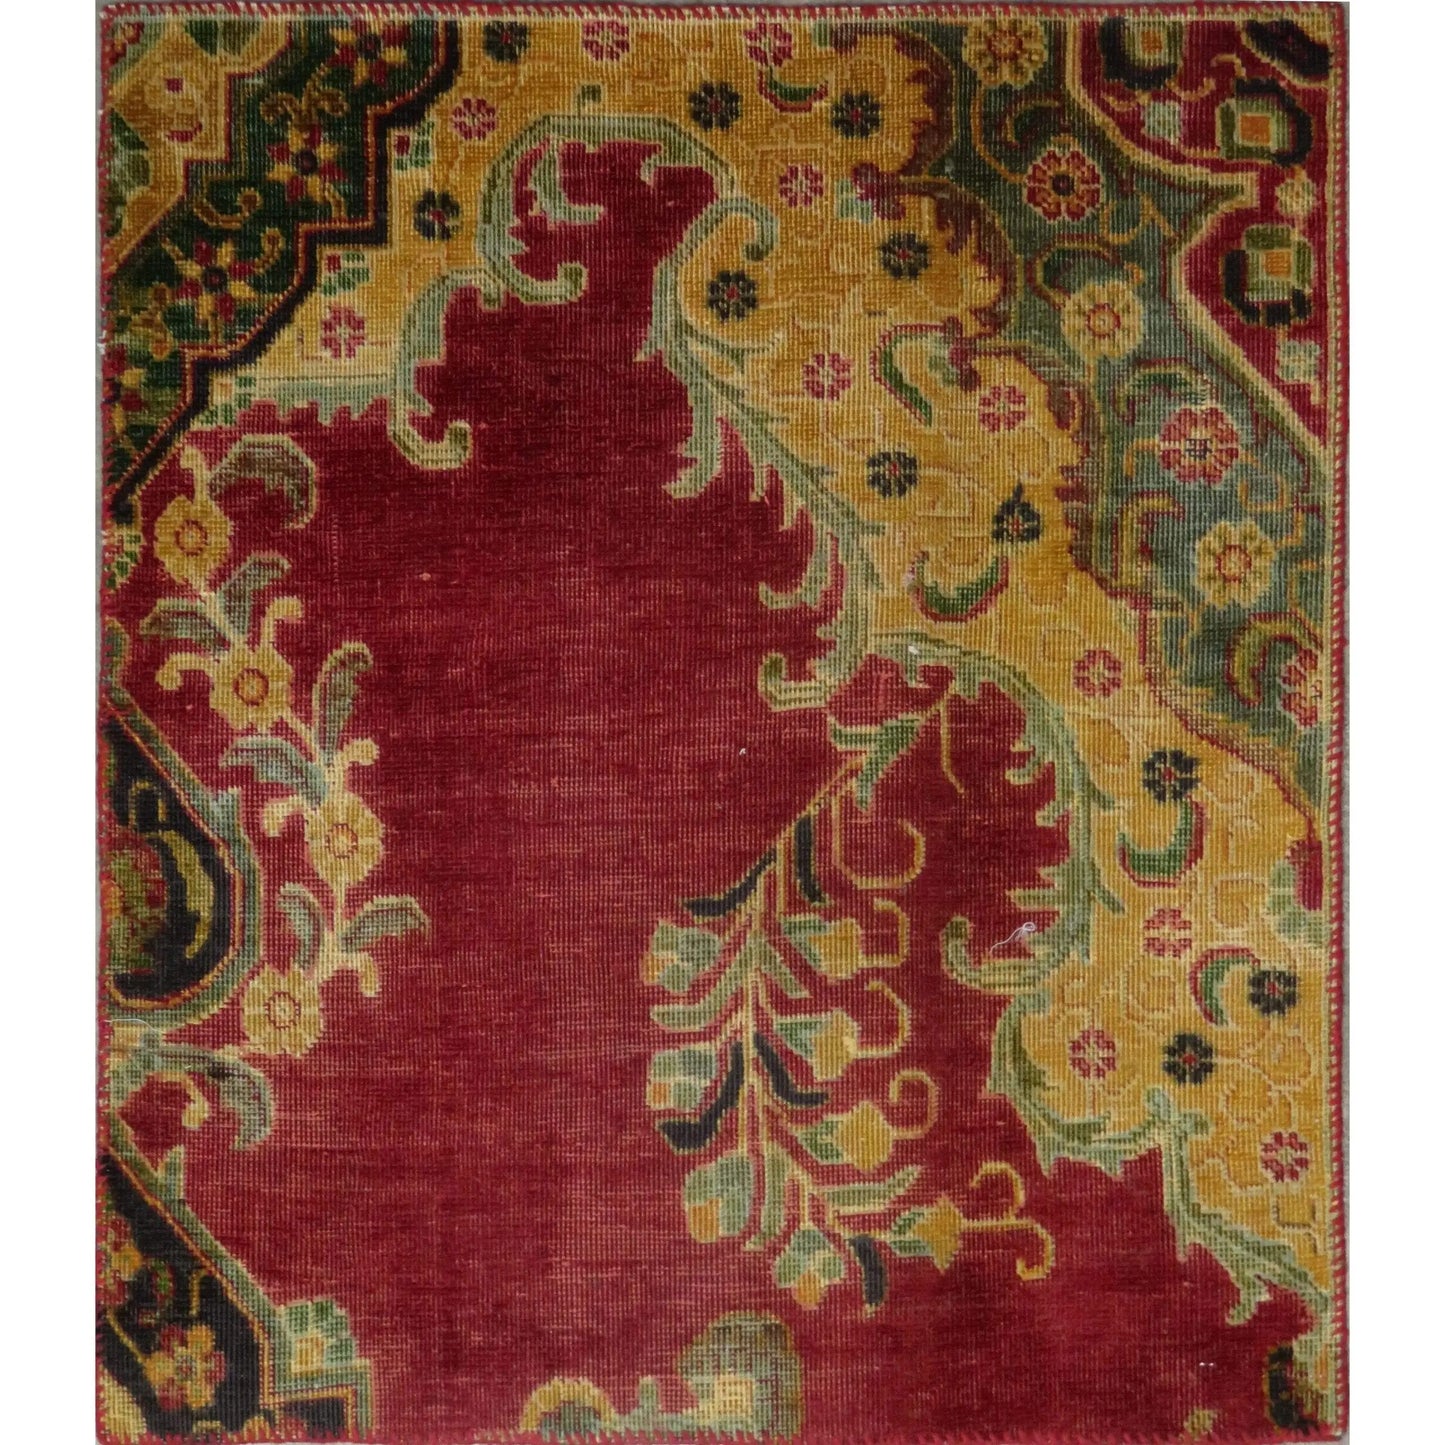 Hand-Knotted Persian Wool Rug _ Luxurious Vintage Design, 3'0" x 2', Artisan Crafted